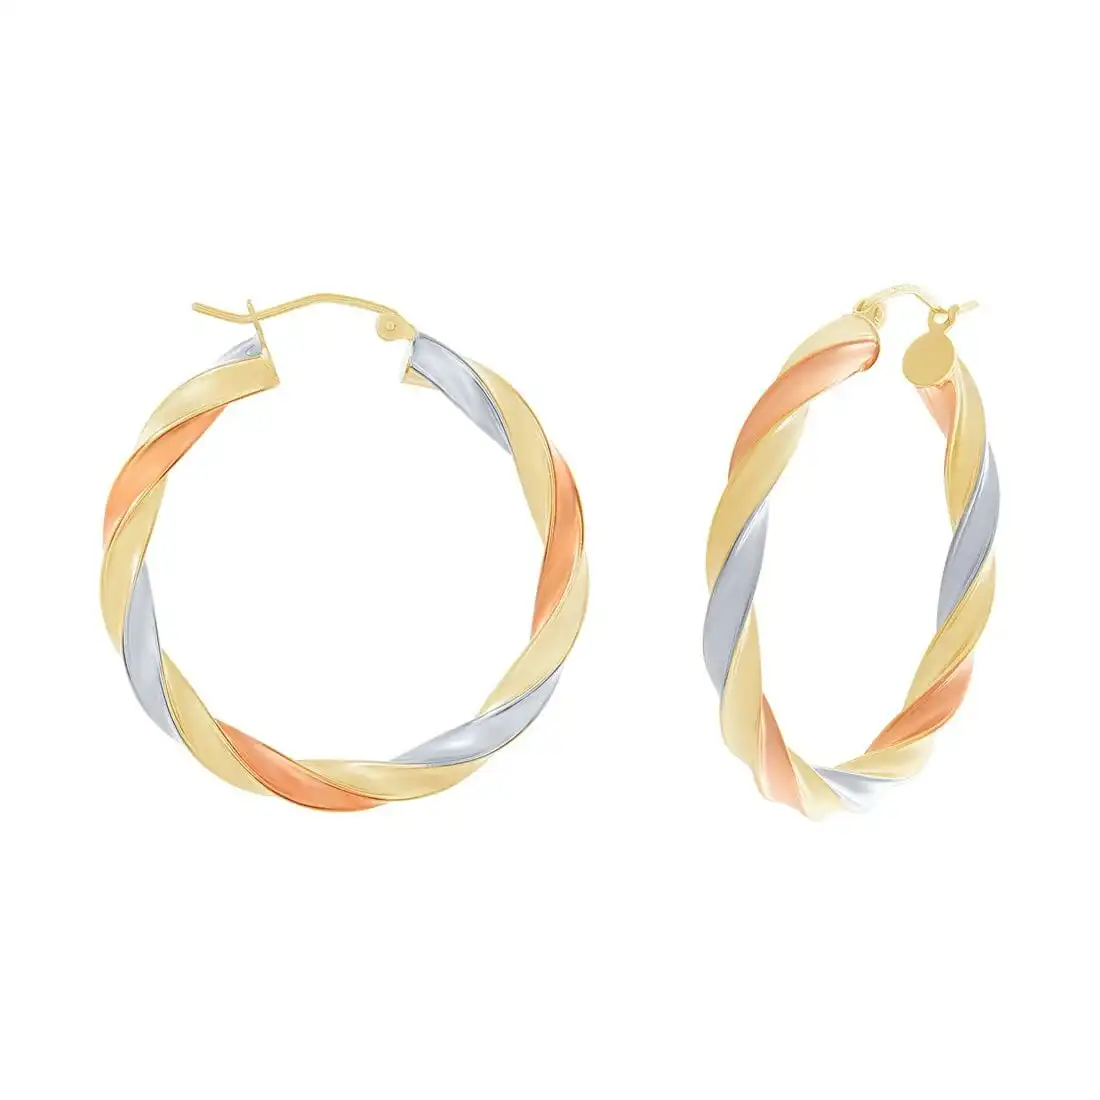 9ct Yellow Gold Three Tone Silver Infused Twist Earrings in 35mm